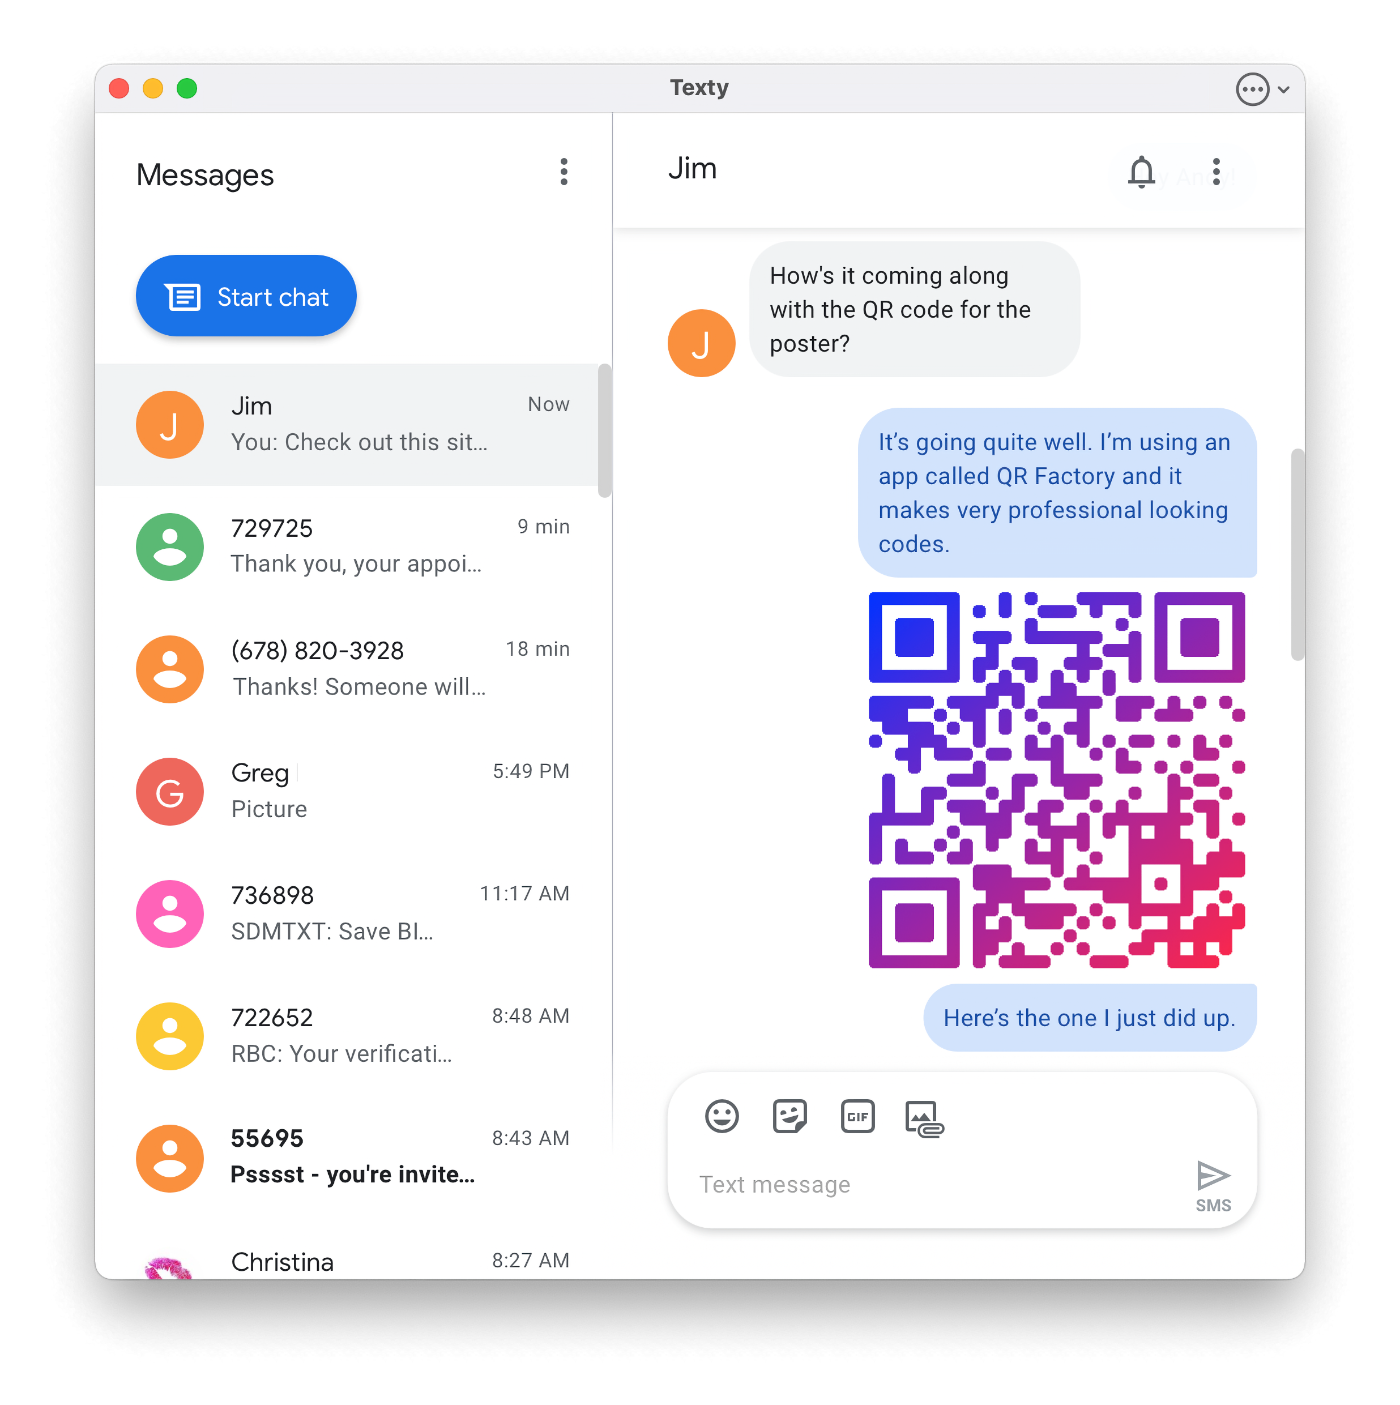 Screenshot of Texty app interfacing with Google Messages, displaying a user-friendly macOS interface with a conversation list on the left and a detailed view of a selected Google Messages conversation on the right, emphasizing seamless integration and efficient conversation management.